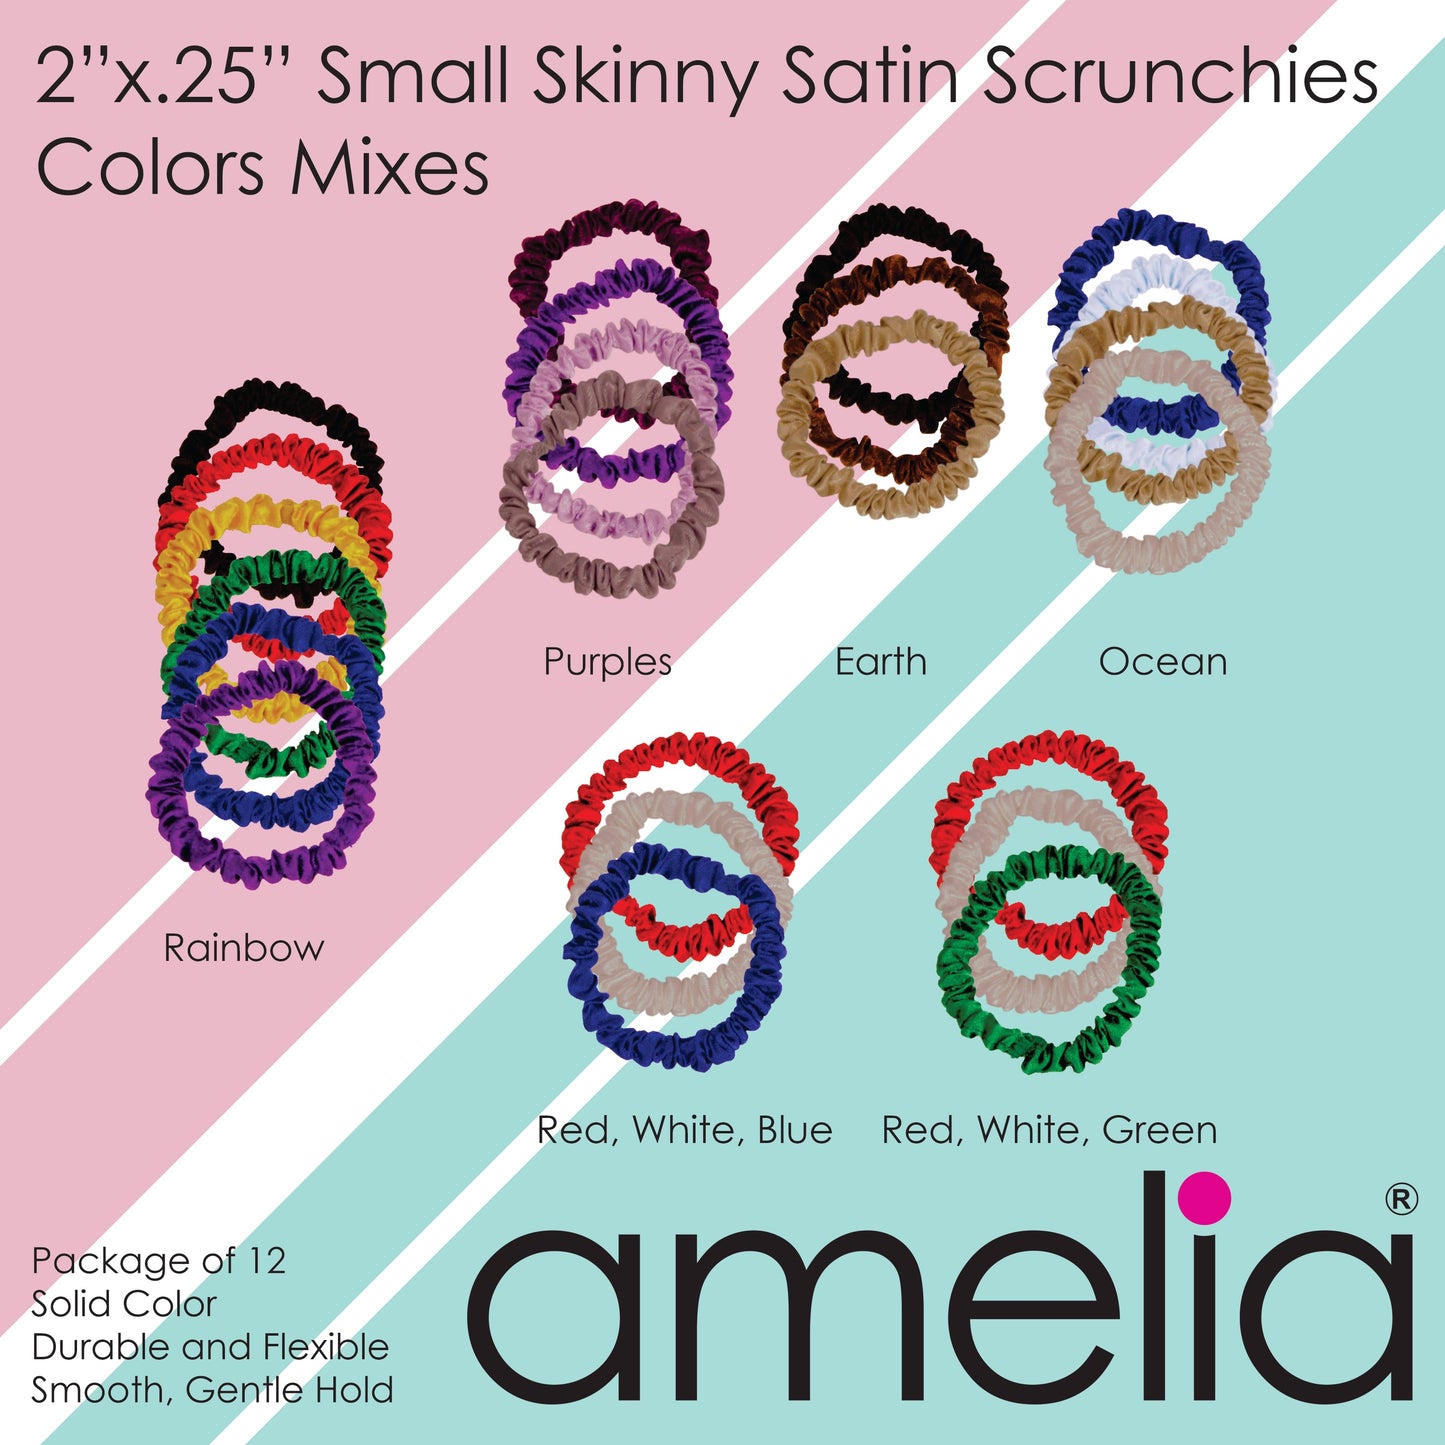 Amelia Beauty, Lavender Skinny Satin Scrunchies, 2in Diameter, Gentle and Strong Hold, No Snag, No Dents or Creases. 12 Pack